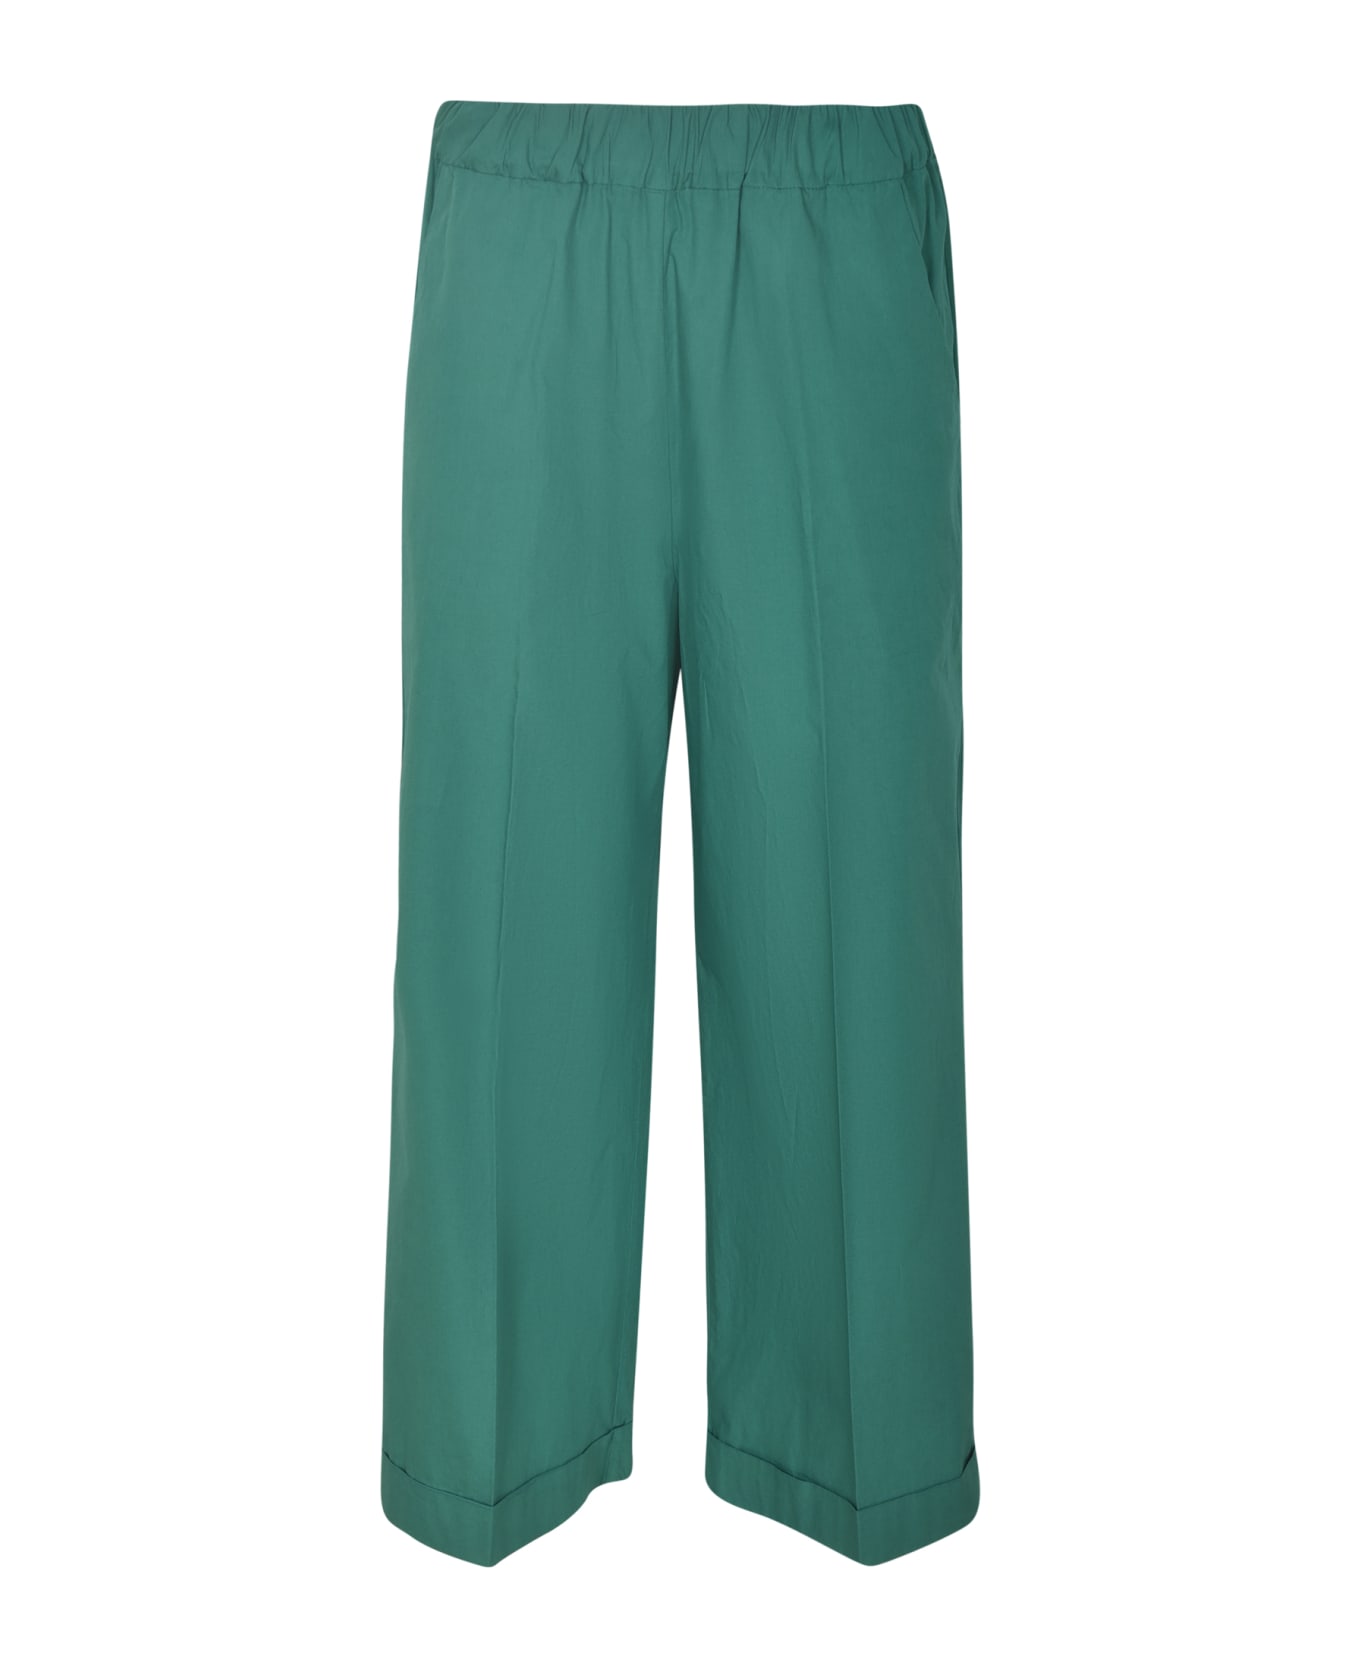 Kiltie Cropped Trousers - Emerald ボトムス